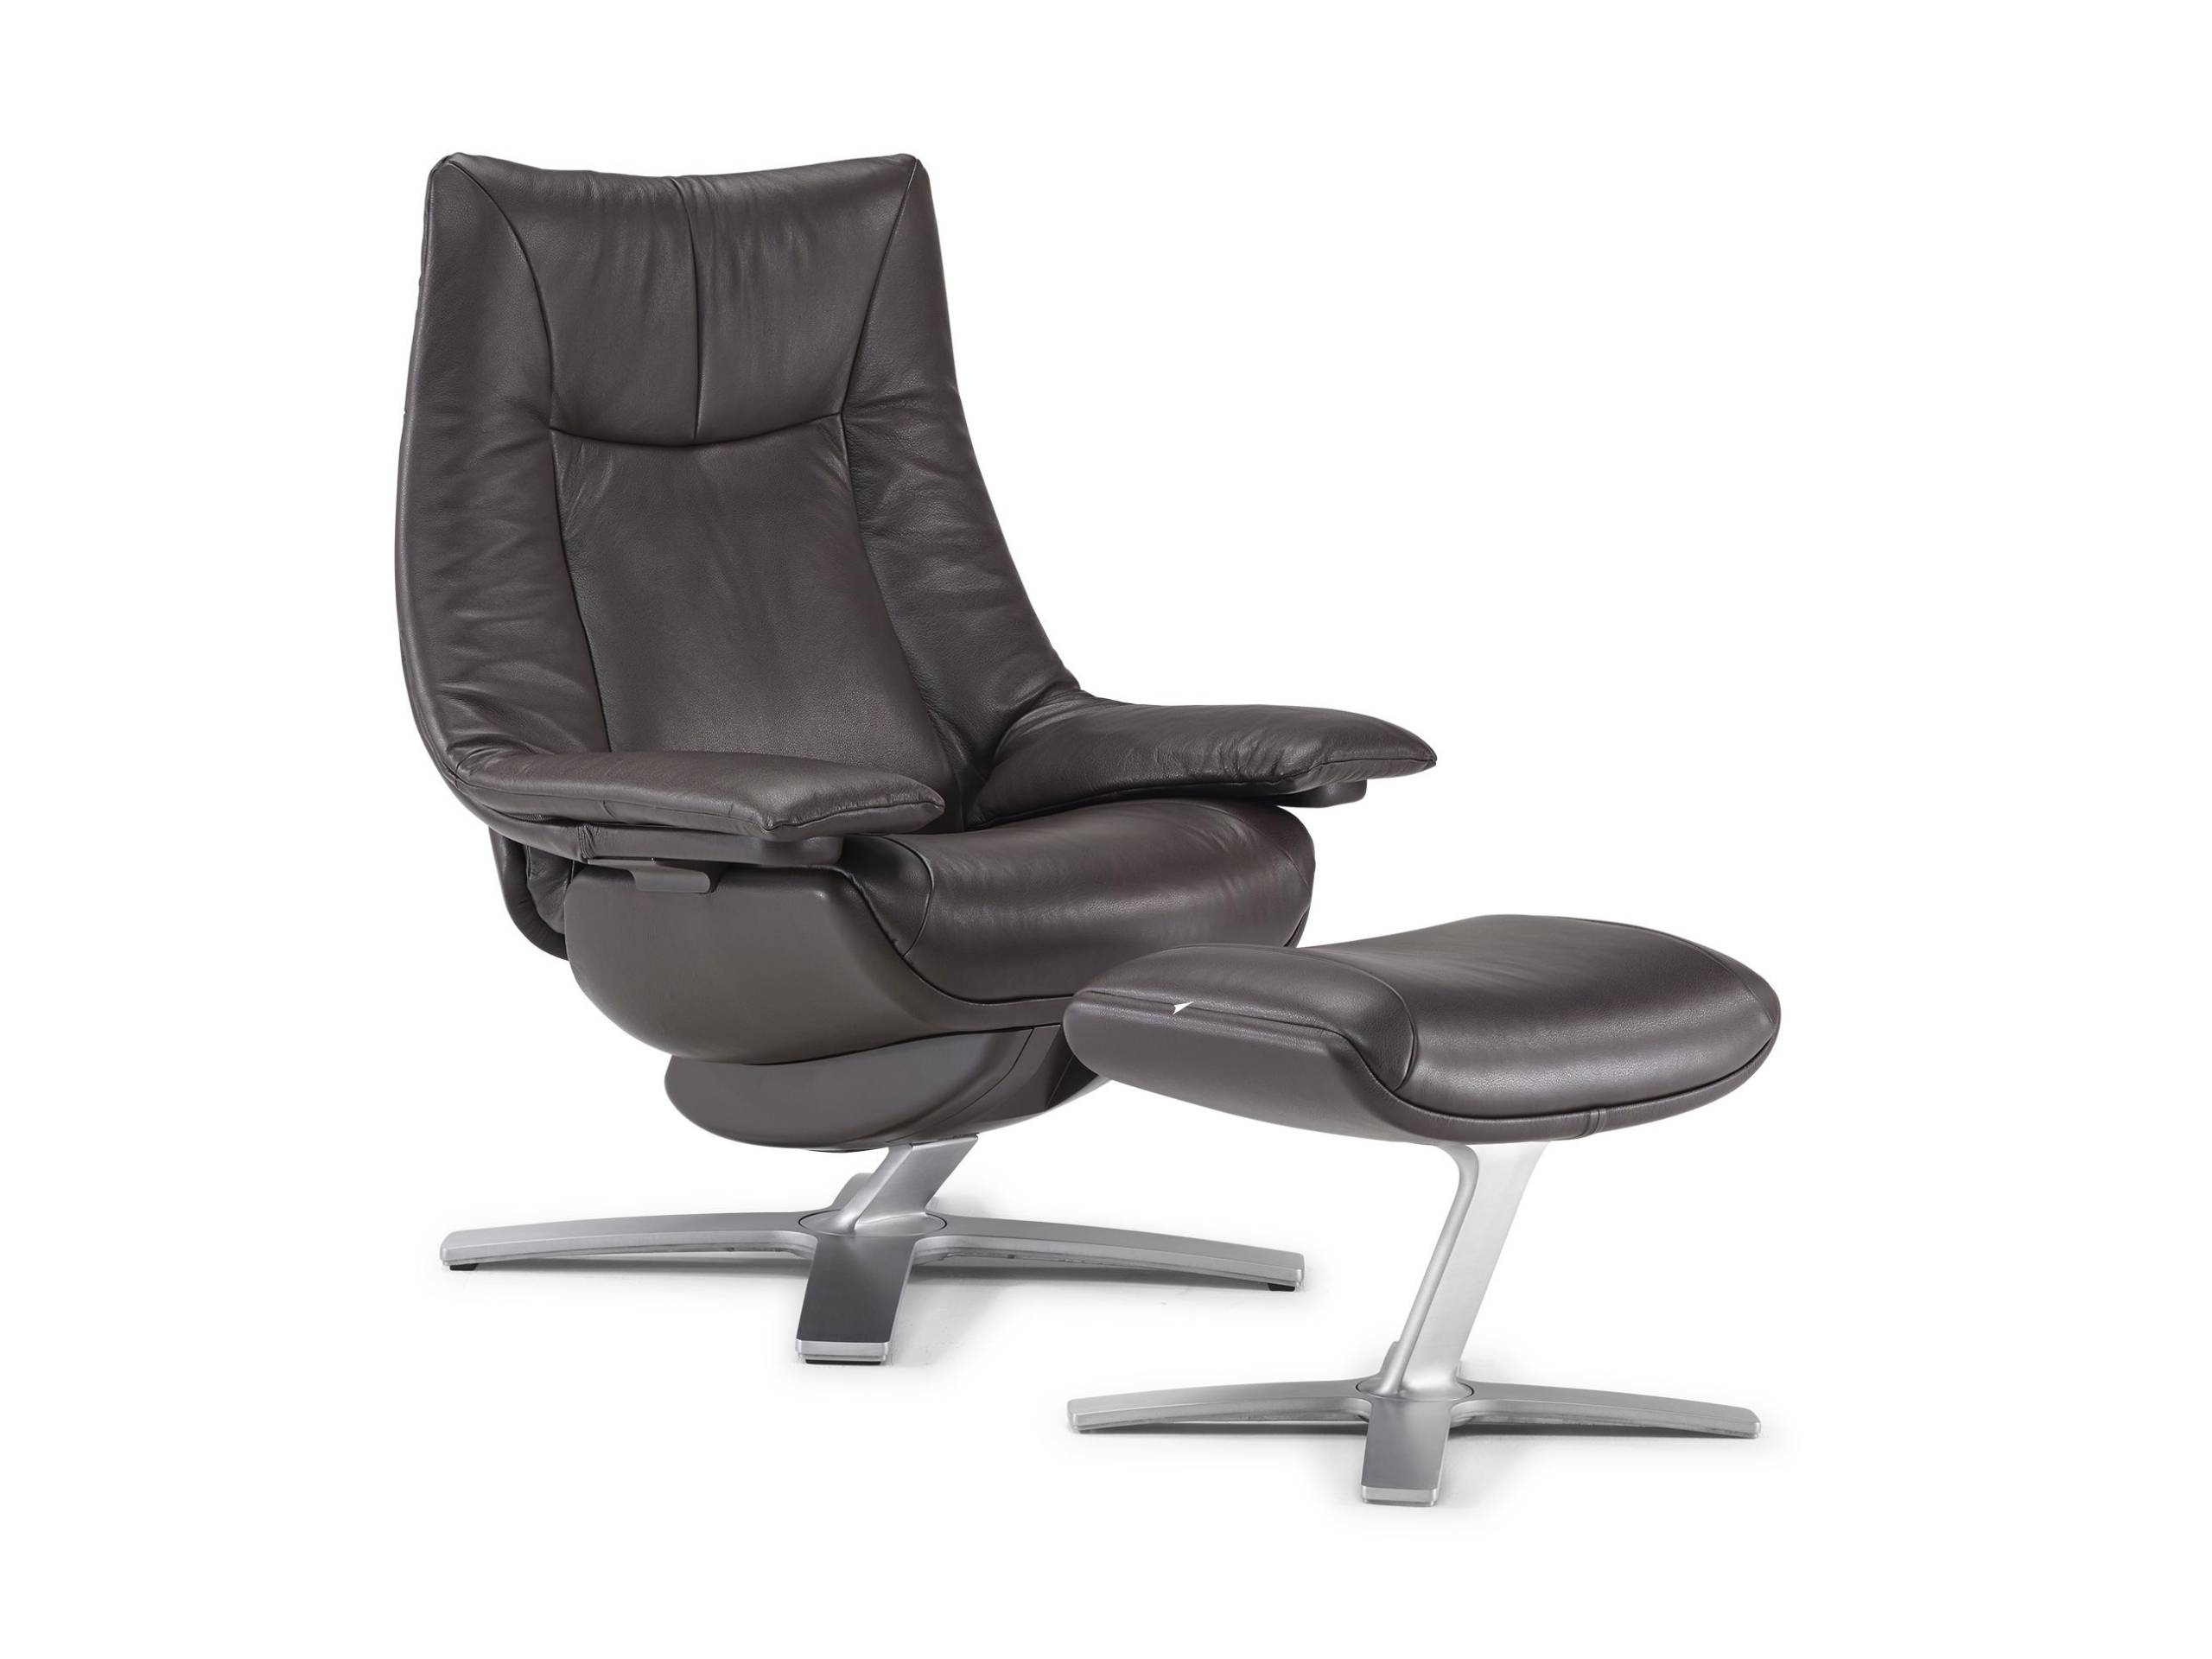 Natuzzi Re-Vive 603Q Casual Queen with Footrest